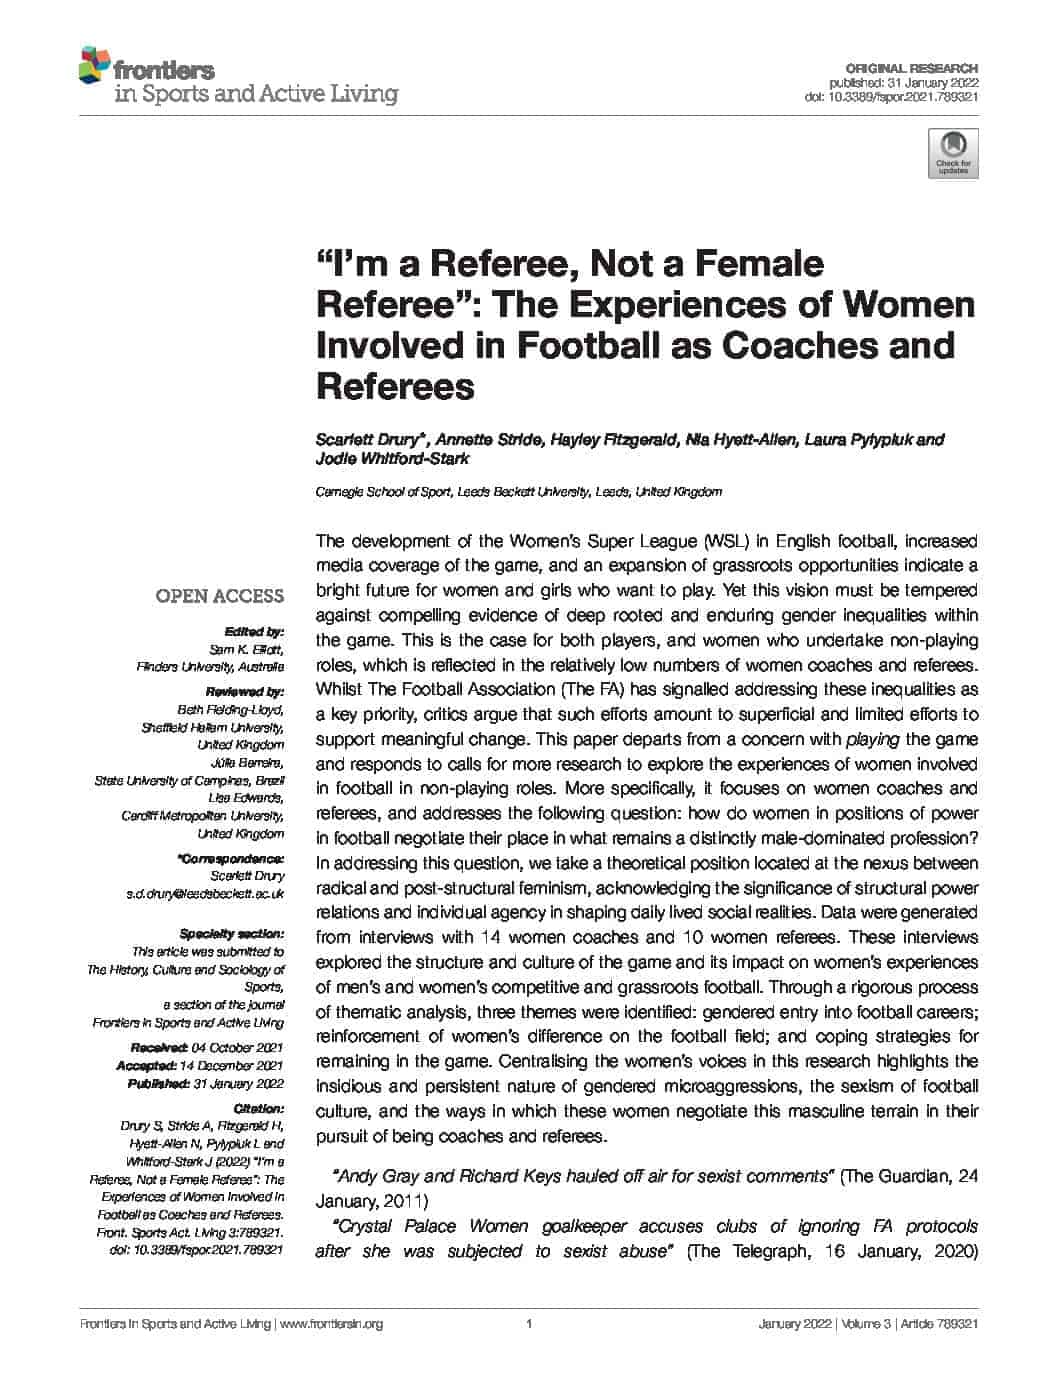 I’m a Referee, Not a Female Referee – The Experiences of Women Involved in Football as Coaches and Referees